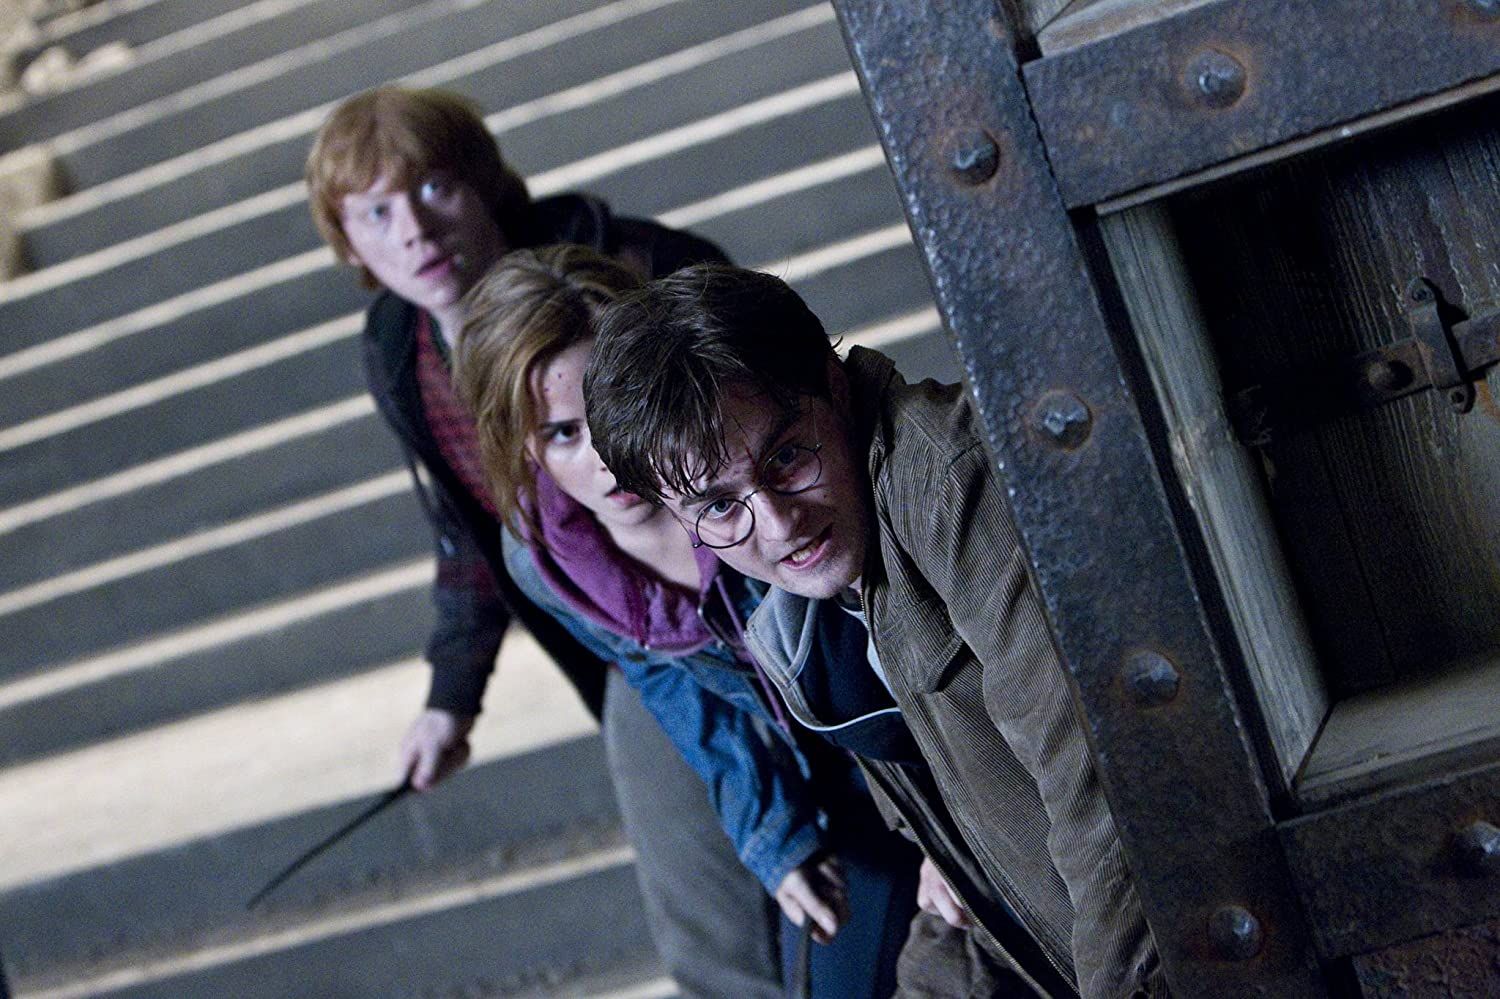 The best Harry Potter movies ranked from worst to best